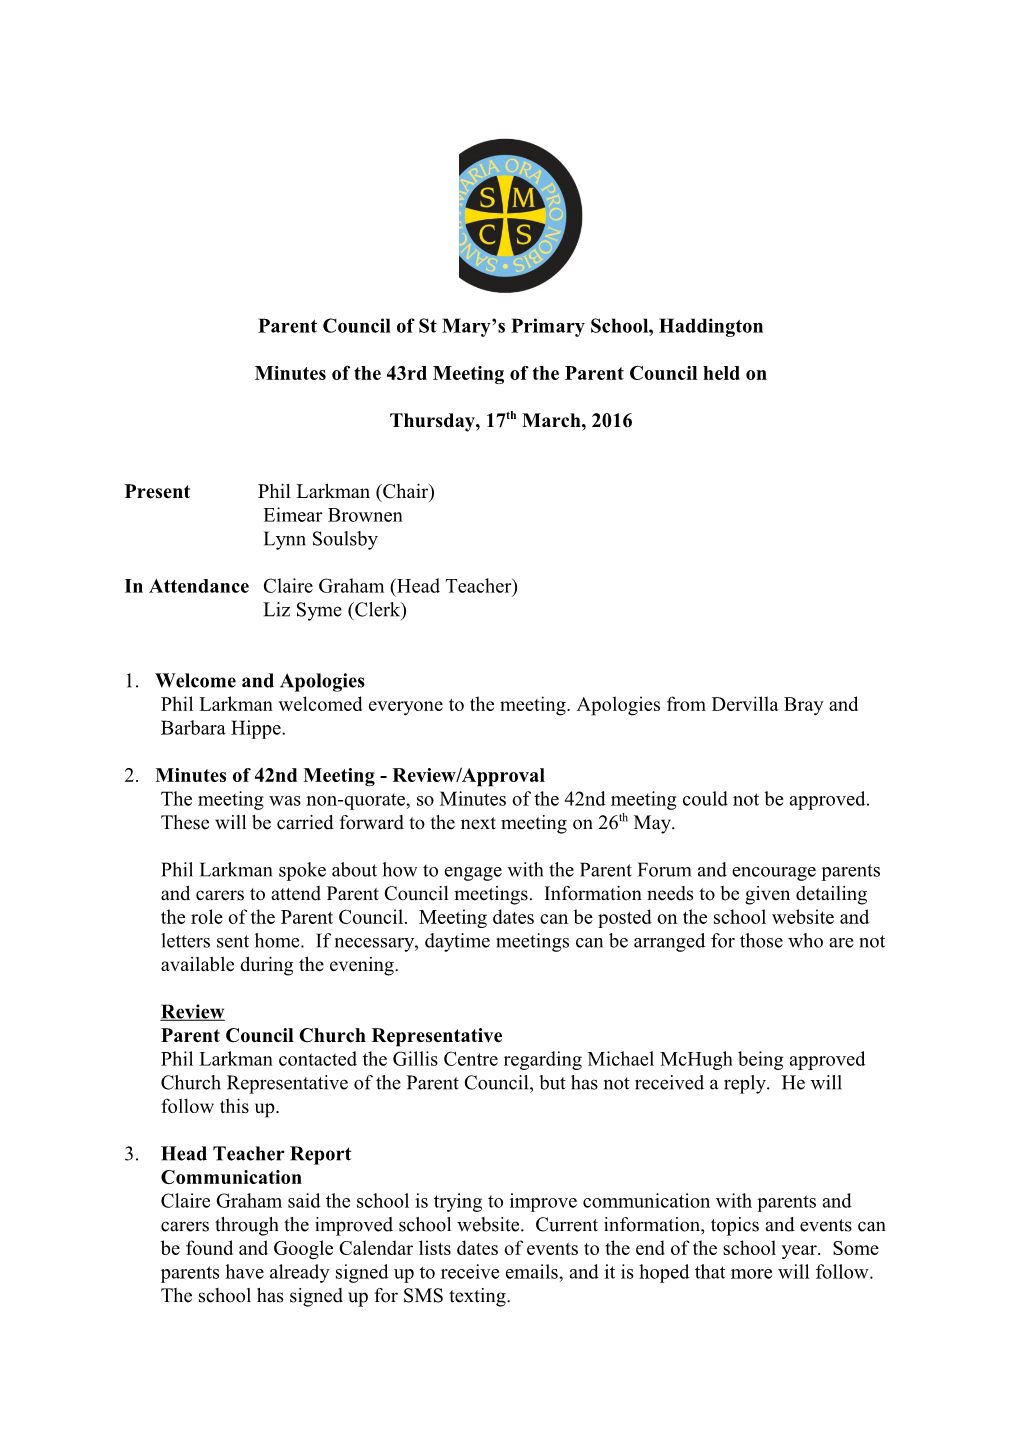 Minutes of the 43Rd Meeting of the Parent Council Held On